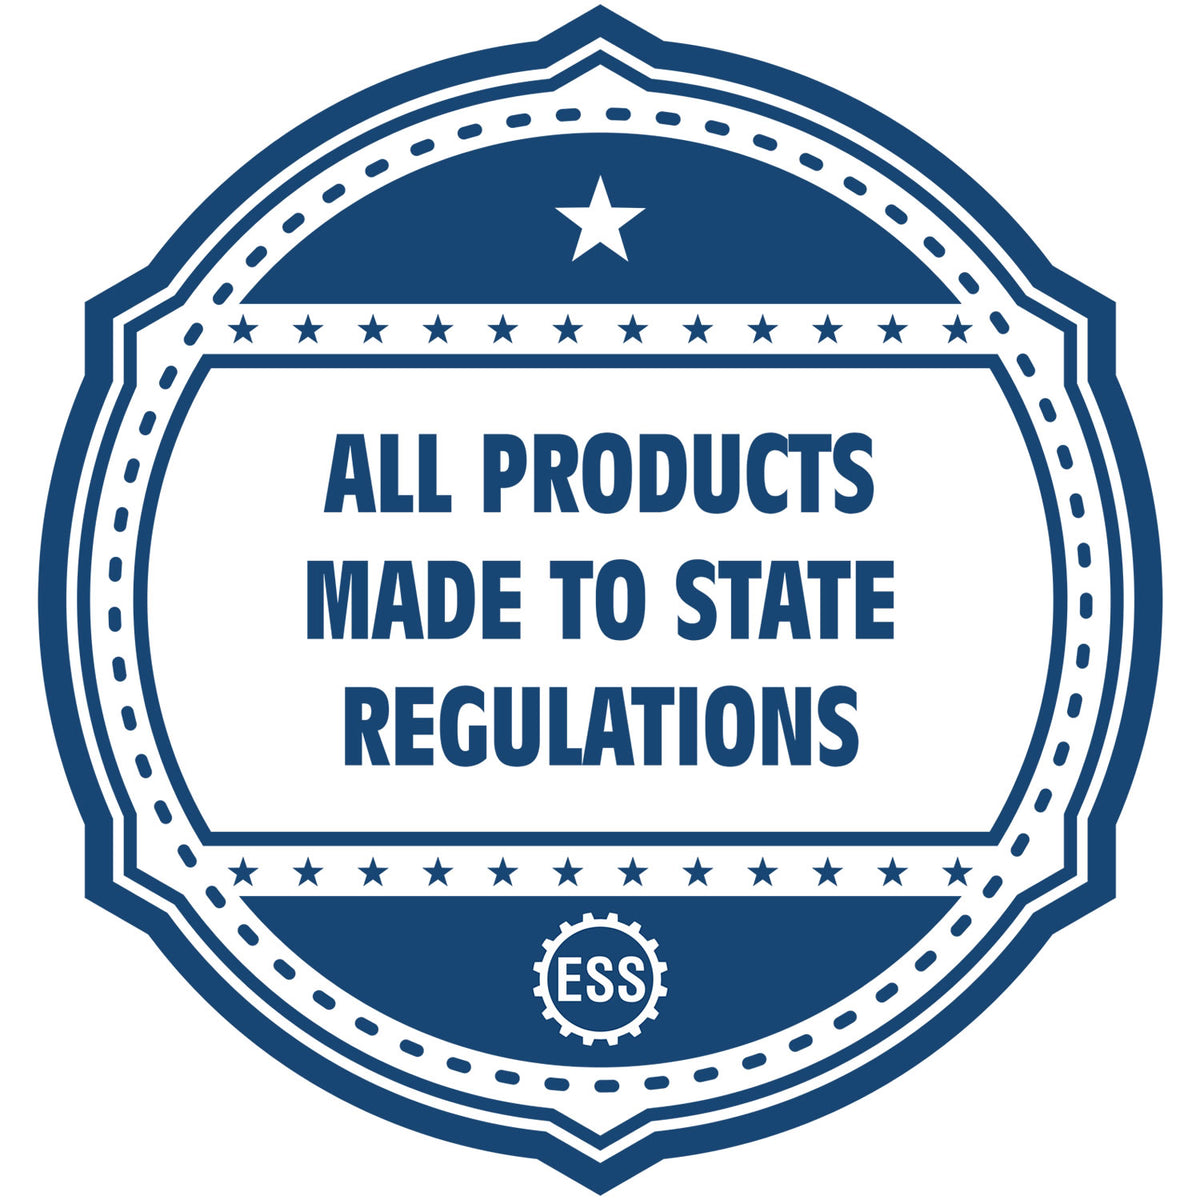 An icon or badge element for the Digital Tennessee PE Stamp and Electronic Seal for Tennessee Engineer showing that this product is made in compliance with state regulations.